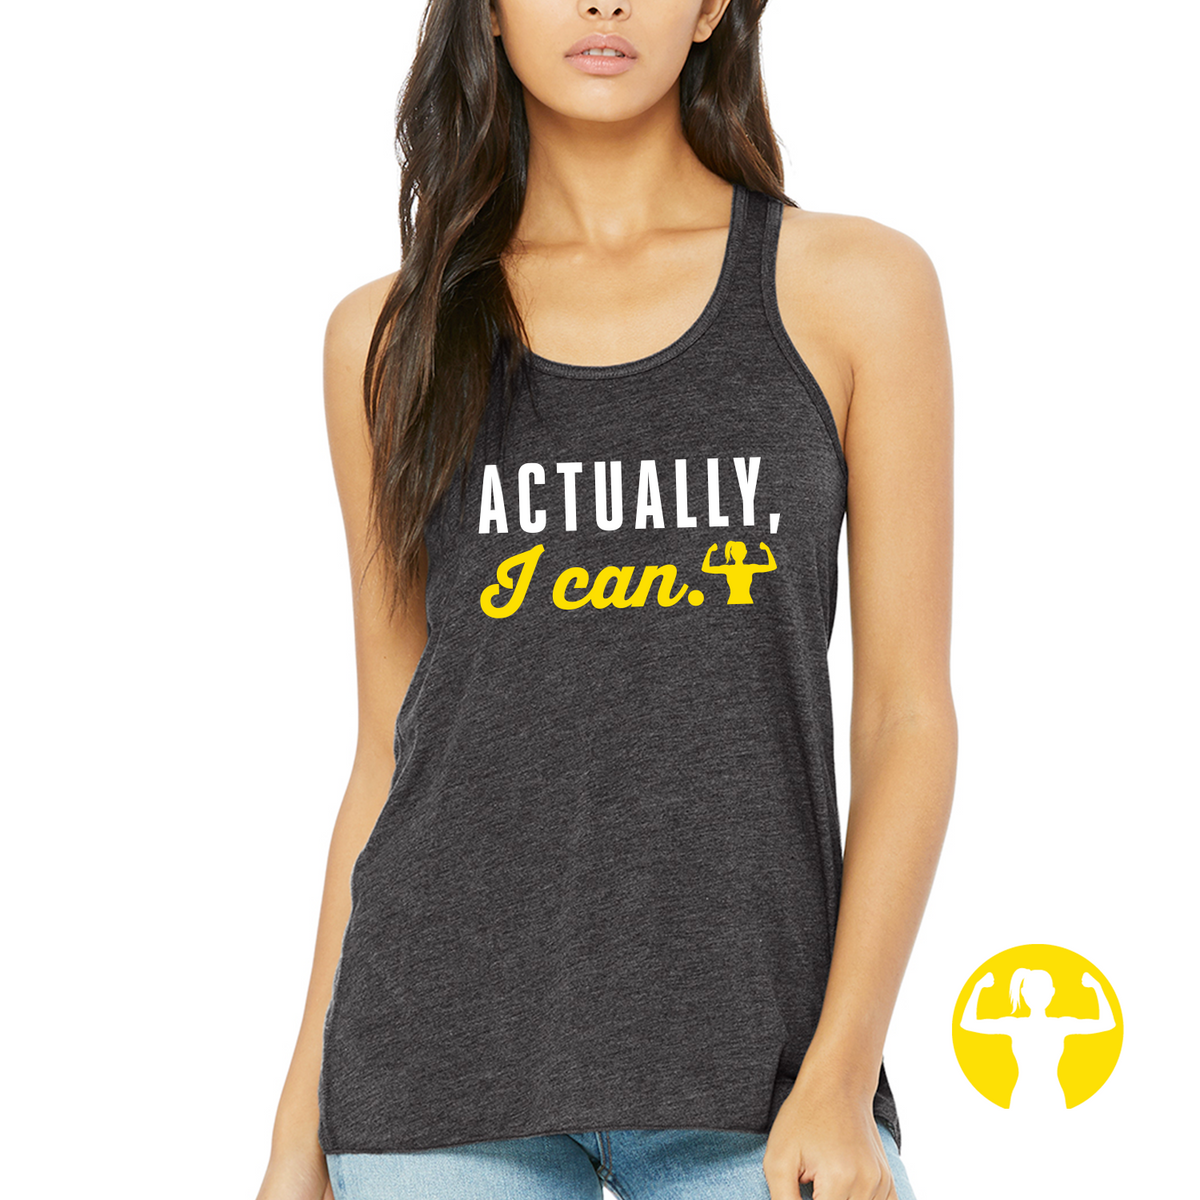 I Have Abs Tank Top - Sociographic Tees